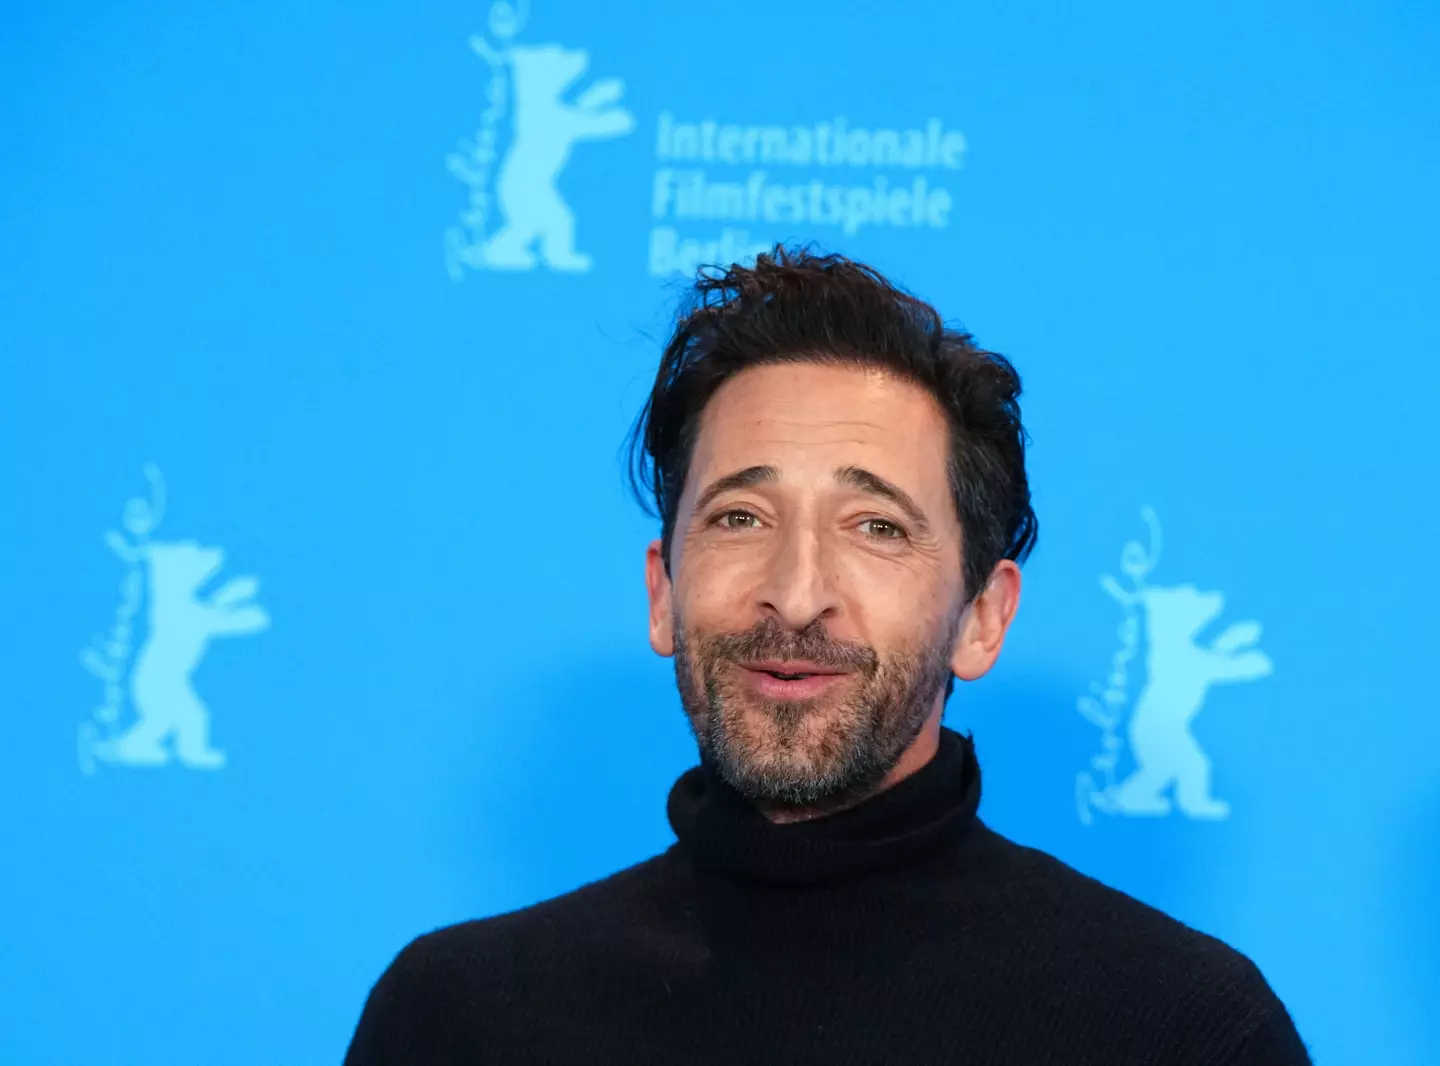 Adrien Brody kissed Berry on stage.